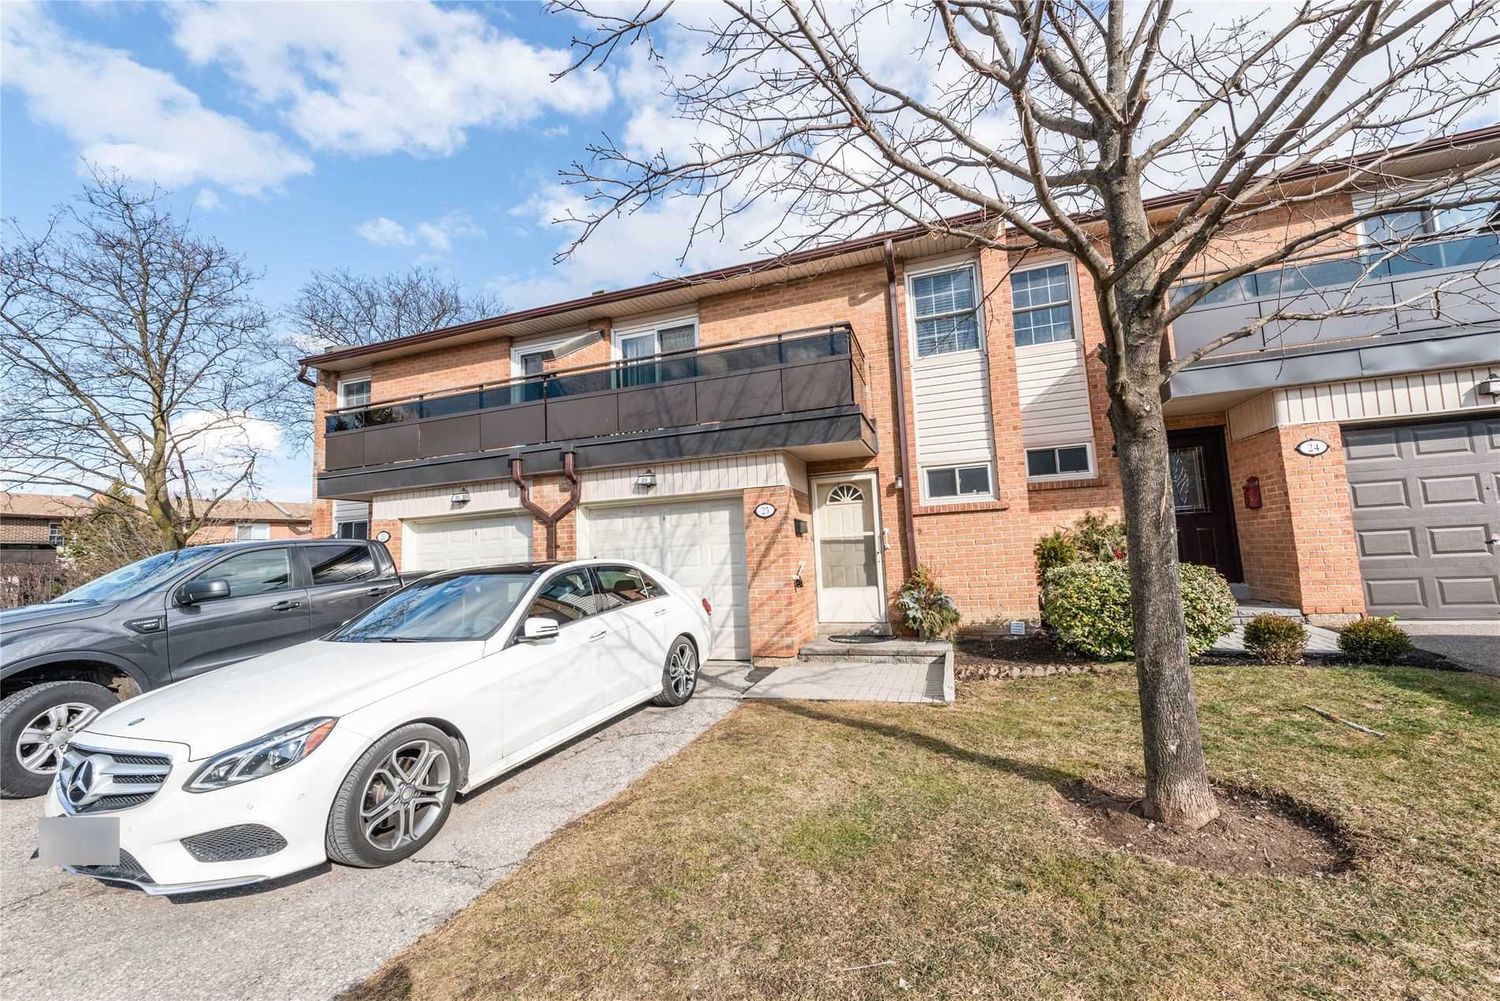 2120 Rathburn Road E. 2120 Rathburn Road Townhomes is located in  Mississauga, Toronto - image #1 of 2